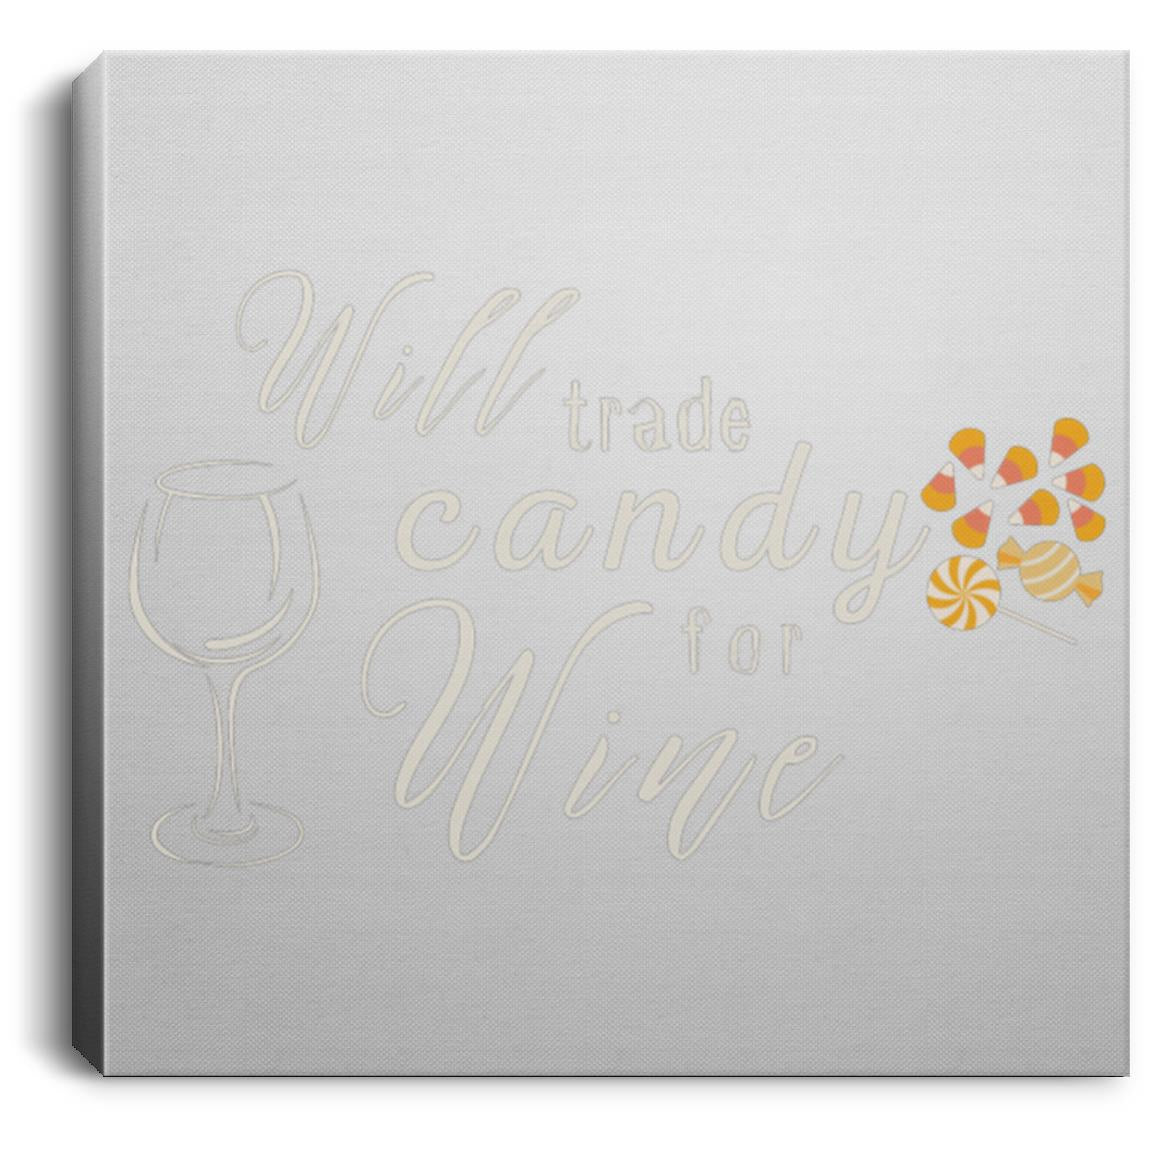 Will Trade Candy for Wine 8x8 canvas Will Trade Candy For Wine 8x8 Halloween Canvas